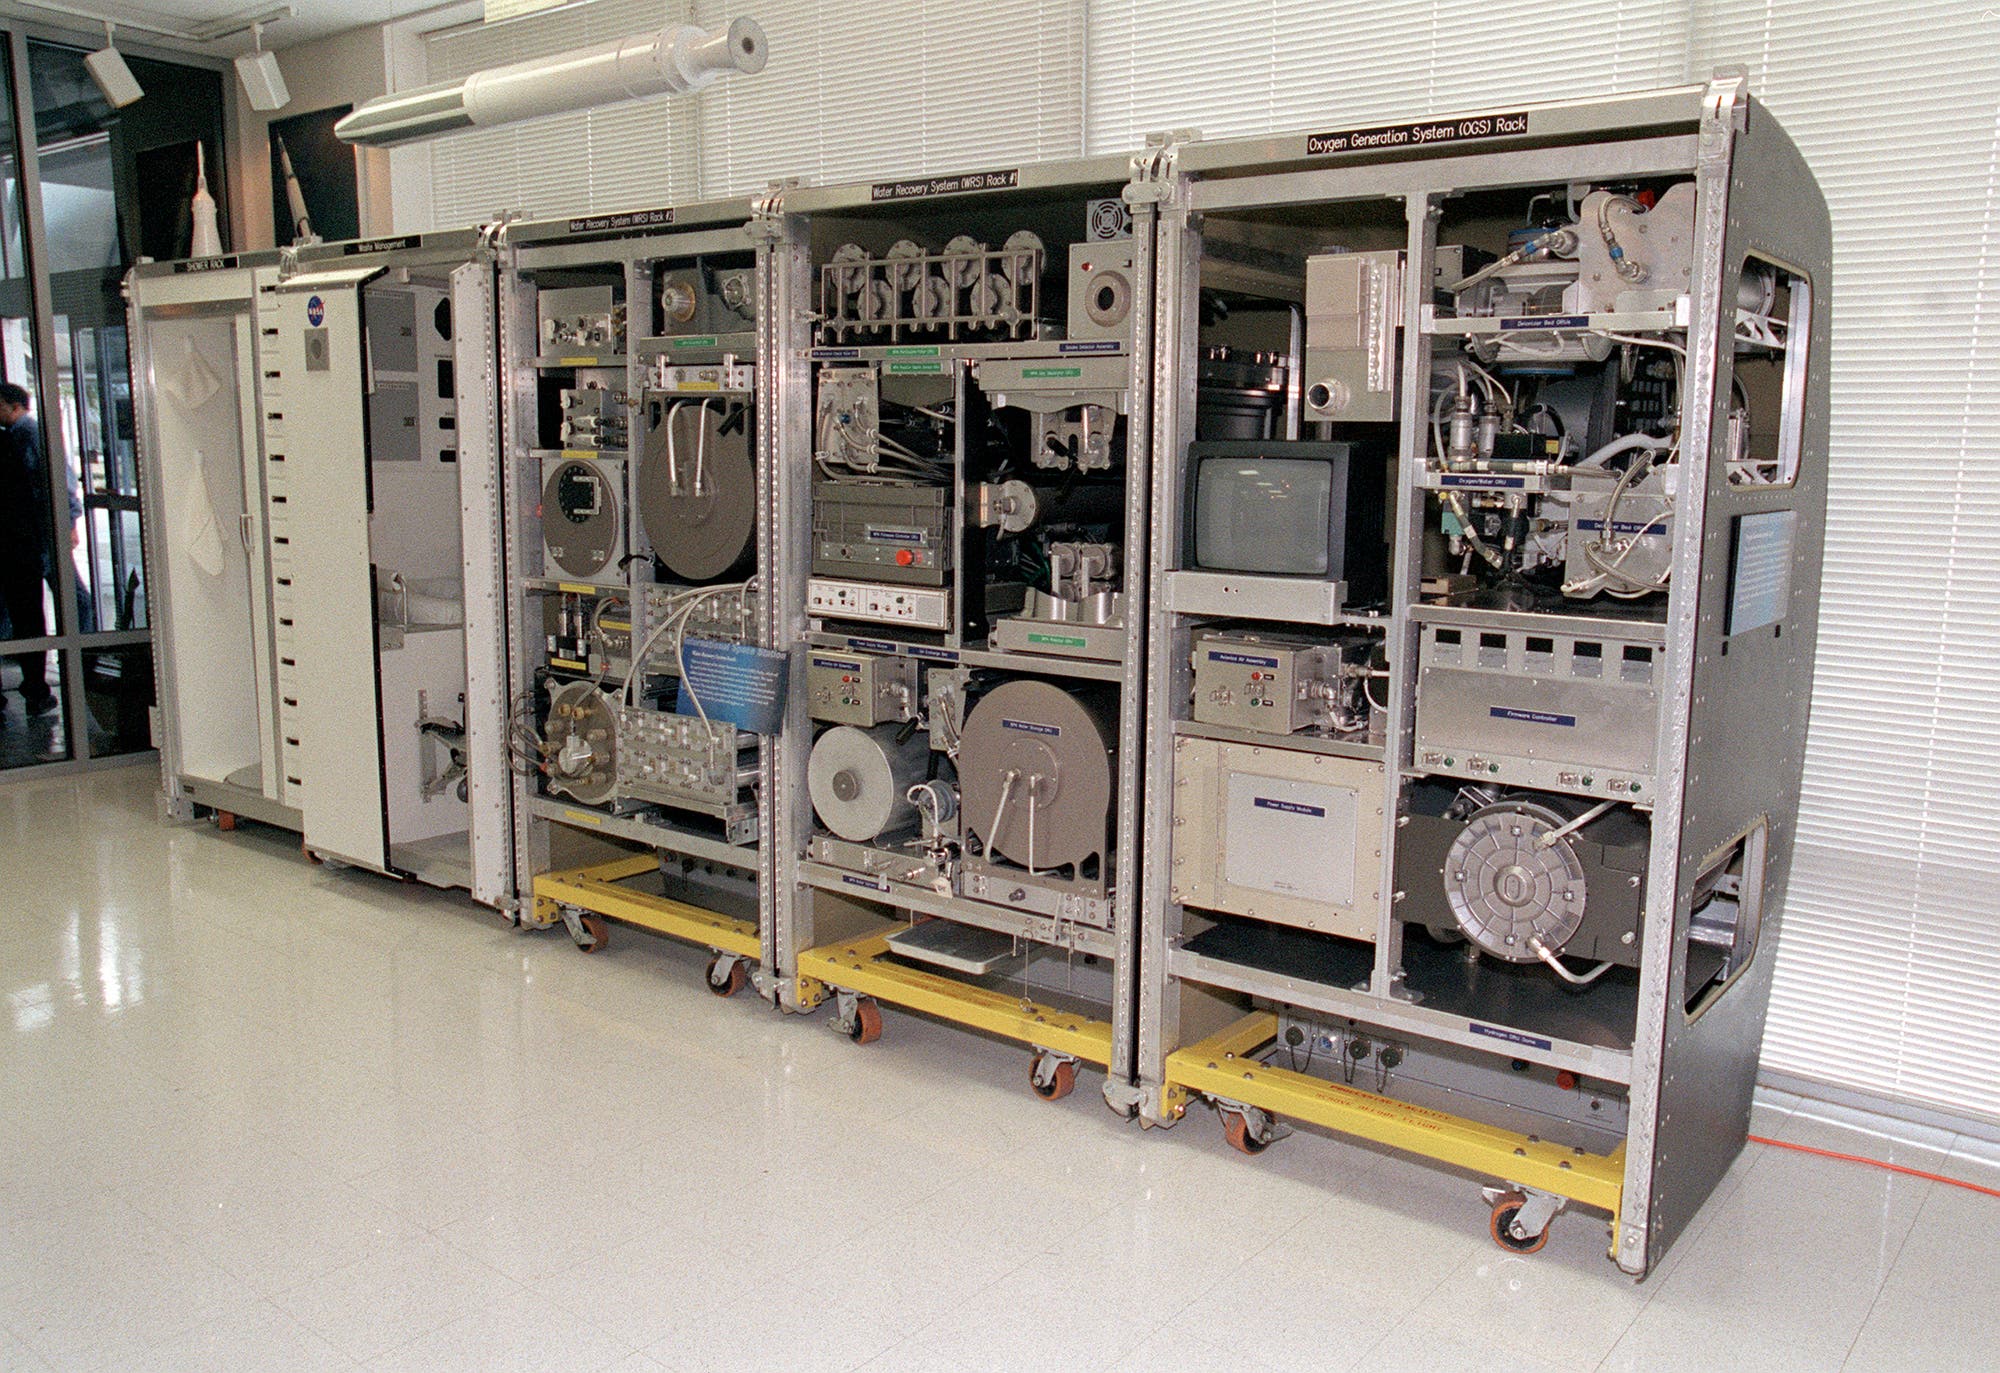 The Environmental Control and Life Support System (ECLSS) installed on the International Space Station